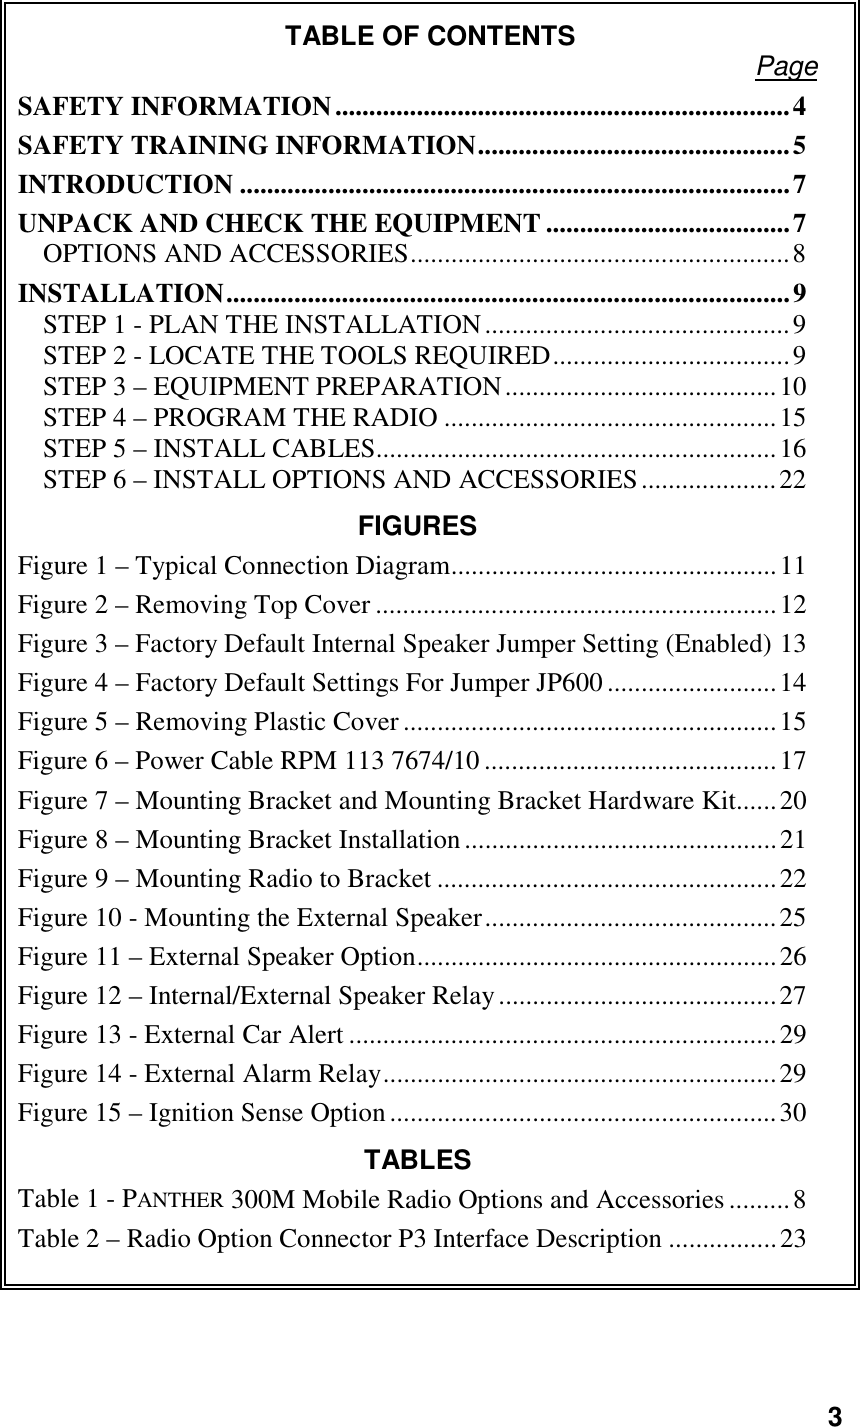 3TABLE OF CONTENTS PageSAFETY INFORMATION...................................................................4SAFETY TRAINING INFORMATION..............................................5INTRODUCTION .................................................................................7UNPACK AND CHECK THE EQUIPMENT ....................................7OPTIONS AND ACCESSORIES........................................................8INSTALLATION...................................................................................9STEP 1 - PLAN THE INSTALLATION.............................................9STEP 2 - LOCATE THE TOOLS REQUIRED...................................9STEP 3 – EQUIPMENT PREPARATION........................................10STEP 4 – PROGRAM THE RADIO .................................................15STEP 5 – INSTALL CABLES...........................................................16STEP 6 – INSTALL OPTIONS AND ACCESSORIES....................22FIGURESFigure 1 – Typical Connection Diagram................................................11Figure 2 – Removing Top Cover ...........................................................12Figure 3 – Factory Default Internal Speaker Jumper Setting (Enabled) 13Figure 4 – Factory Default Settings For Jumper JP600 .........................14Figure 5 – Removing Plastic Cover .......................................................15Figure 6 – Power Cable RPM 113 7674/10...........................................17Figure 7 – Mounting Bracket and Mounting Bracket Hardware Kit......20Figure 8 – Mounting Bracket Installation..............................................21Figure 9 – Mounting Radio to Bracket ..................................................22Figure 10 - Mounting the External Speaker...........................................25Figure 11 – External Speaker Option.....................................................26Figure 12 – Internal/External Speaker Relay.........................................27Figure 13 - External Car Alert ...............................................................29Figure 14 - External Alarm Relay..........................................................29Figure 15 – Ignition Sense Option.........................................................30TABLESTable 1 - PANTHER 300M Mobile Radio Options and Accessories .........8Table 2 – Radio Option Connector P3 Interface Description ................23